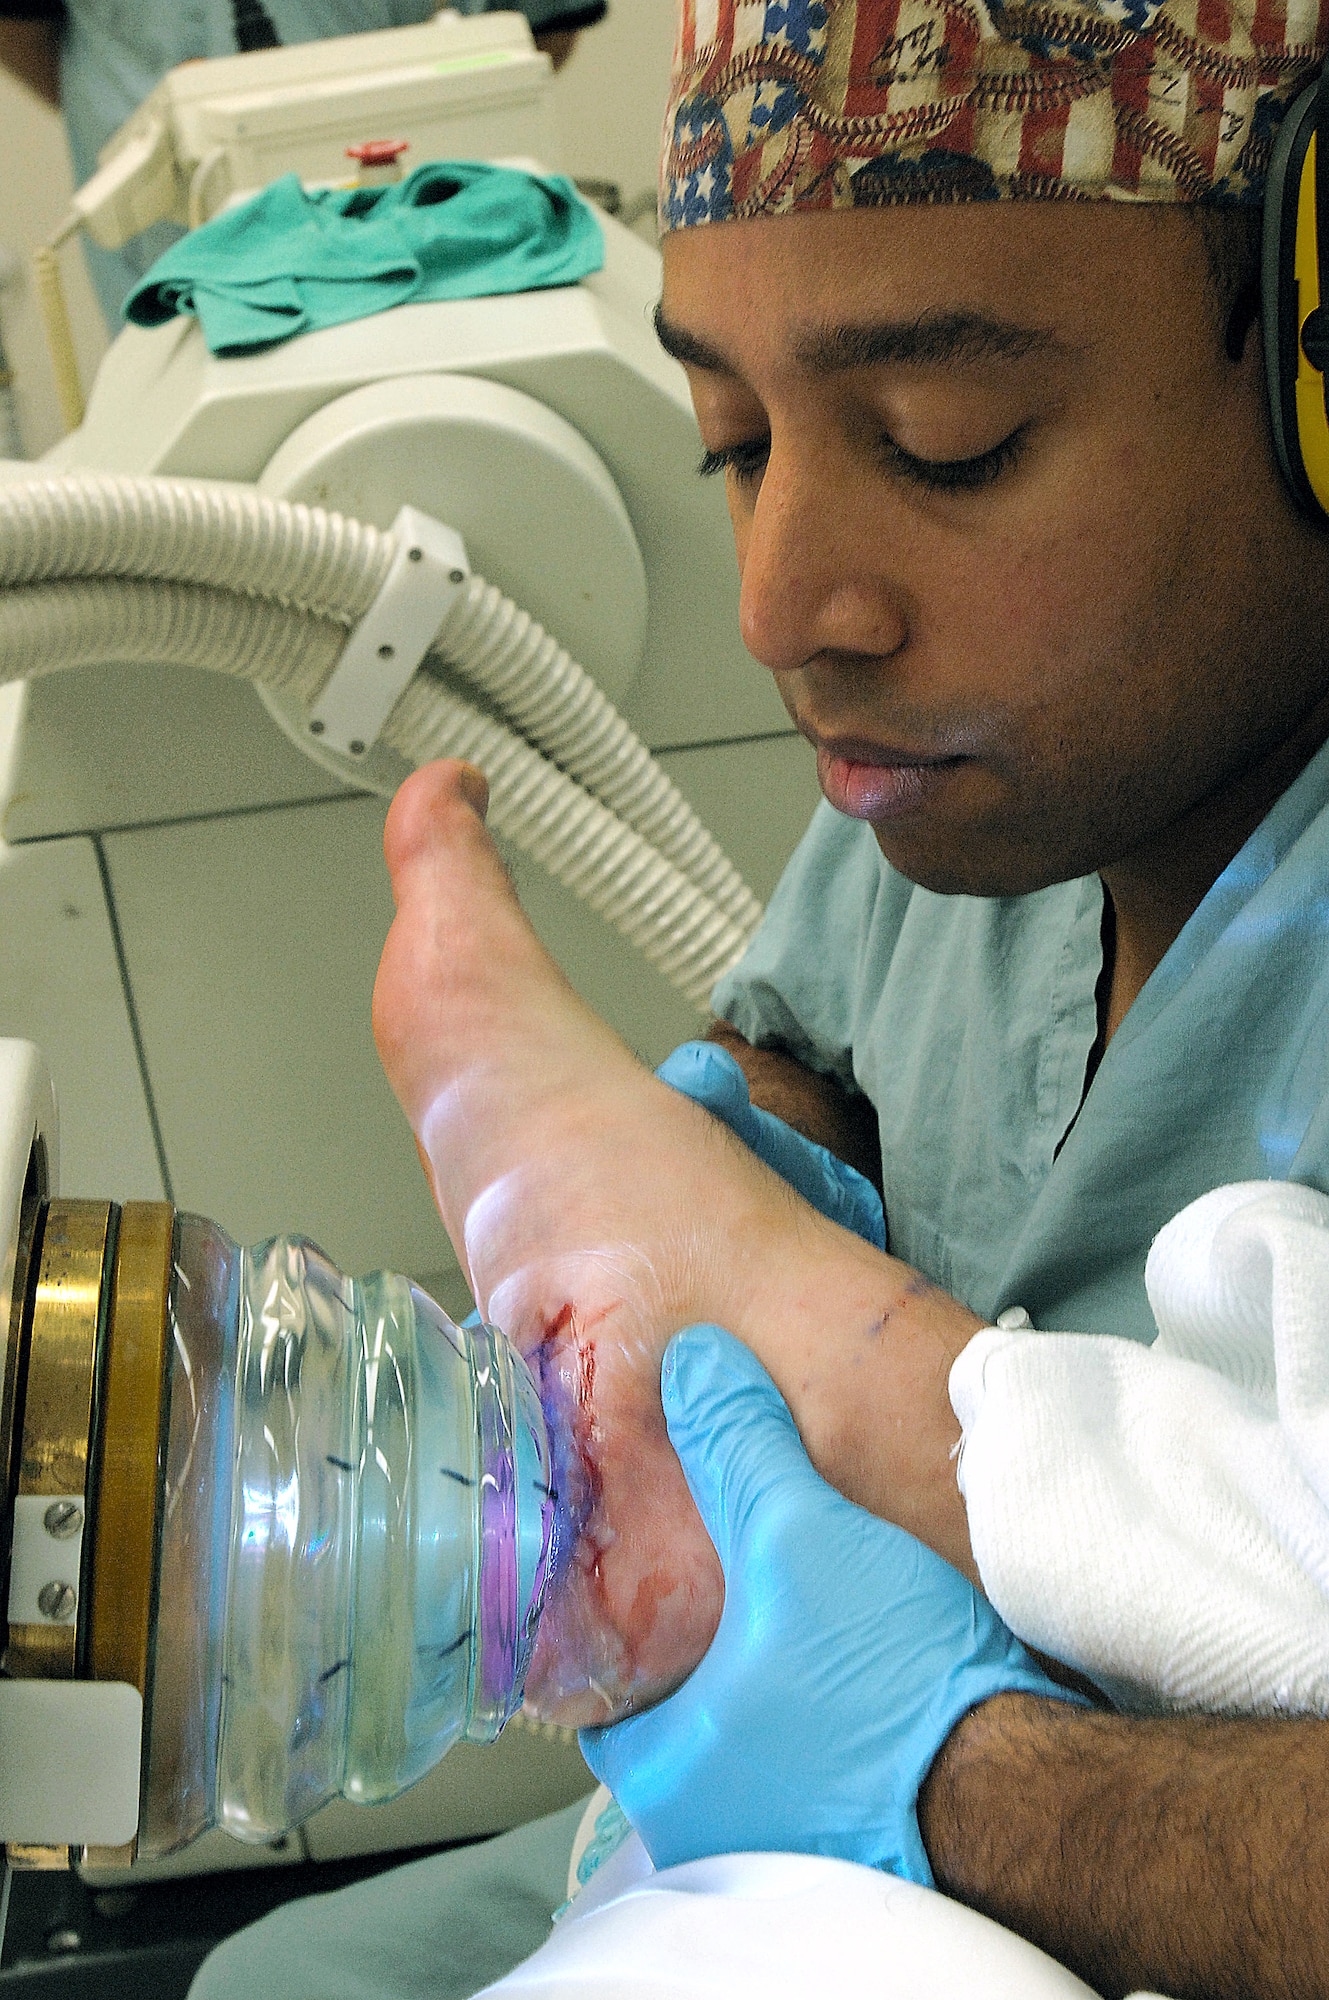 Capt. Hjalmar Contreras, 59th Orthopedic and Rehabilitation Squadron, performs an Ossatron procedure March 14 on a patient at Wilford Hall Medical Centerat Lackland Air Force Base, Texas.  Captain Contreras is the chief of podiatric surgery and spearheaded a new procedure to treat severe plantar fasciitis that requires less recovery time for patients. (U.S. Air Force photo/Senior Airman Erin M. Peterson)